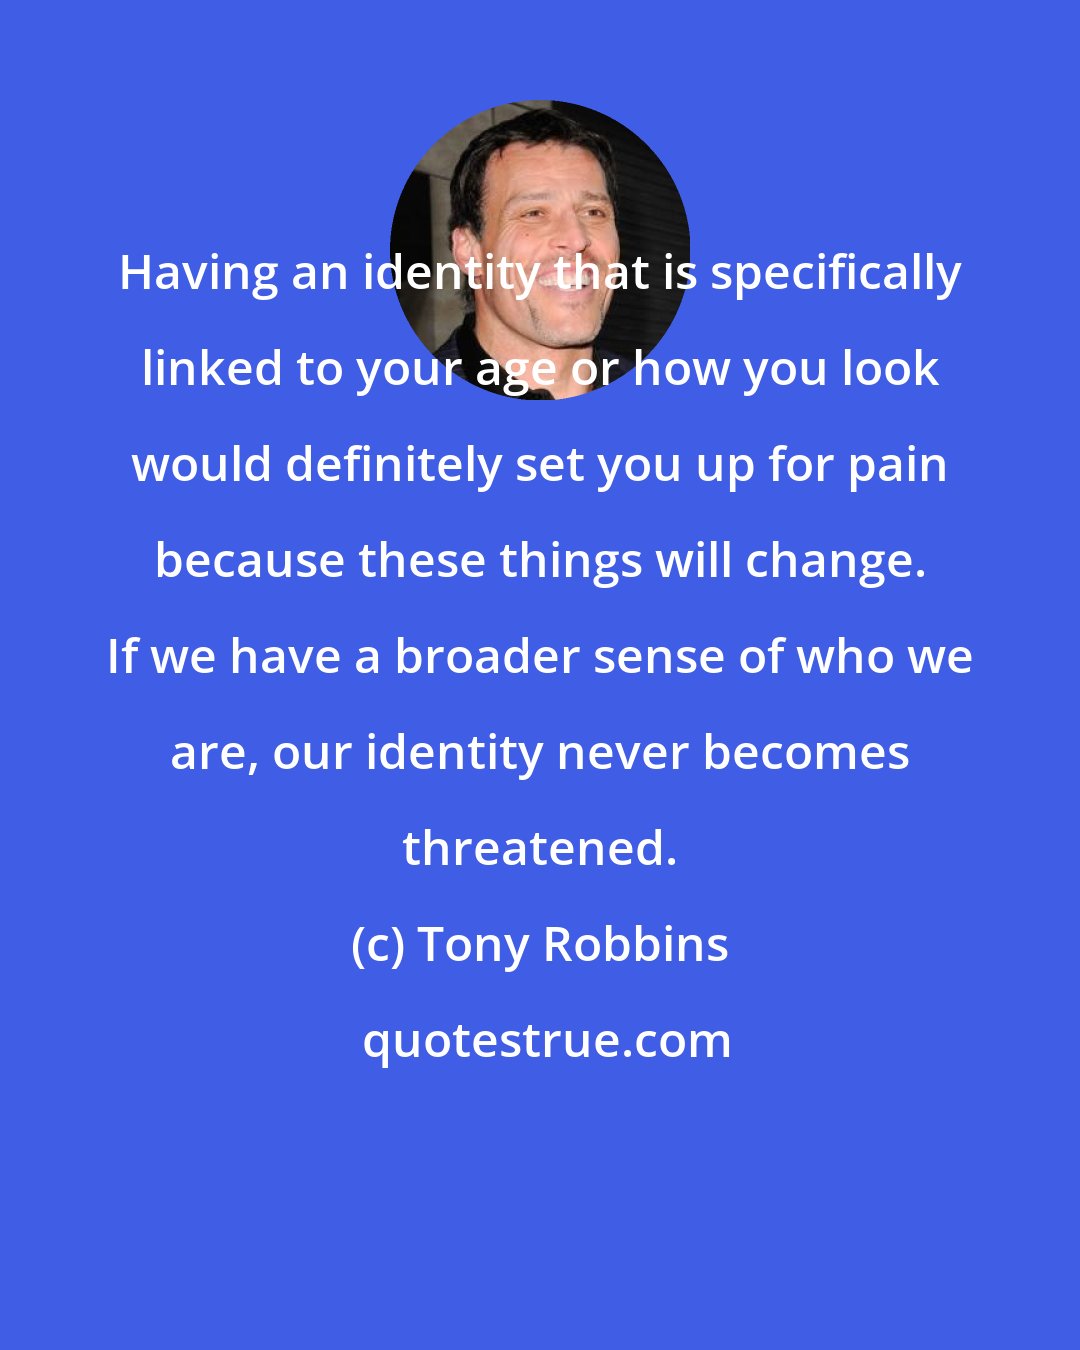 Tony Robbins: Having an identity that is specifically linked to your age or how you look would definitely set you up for pain because these things will change. If we have a broader sense of who we are, our identity never becomes threatened.